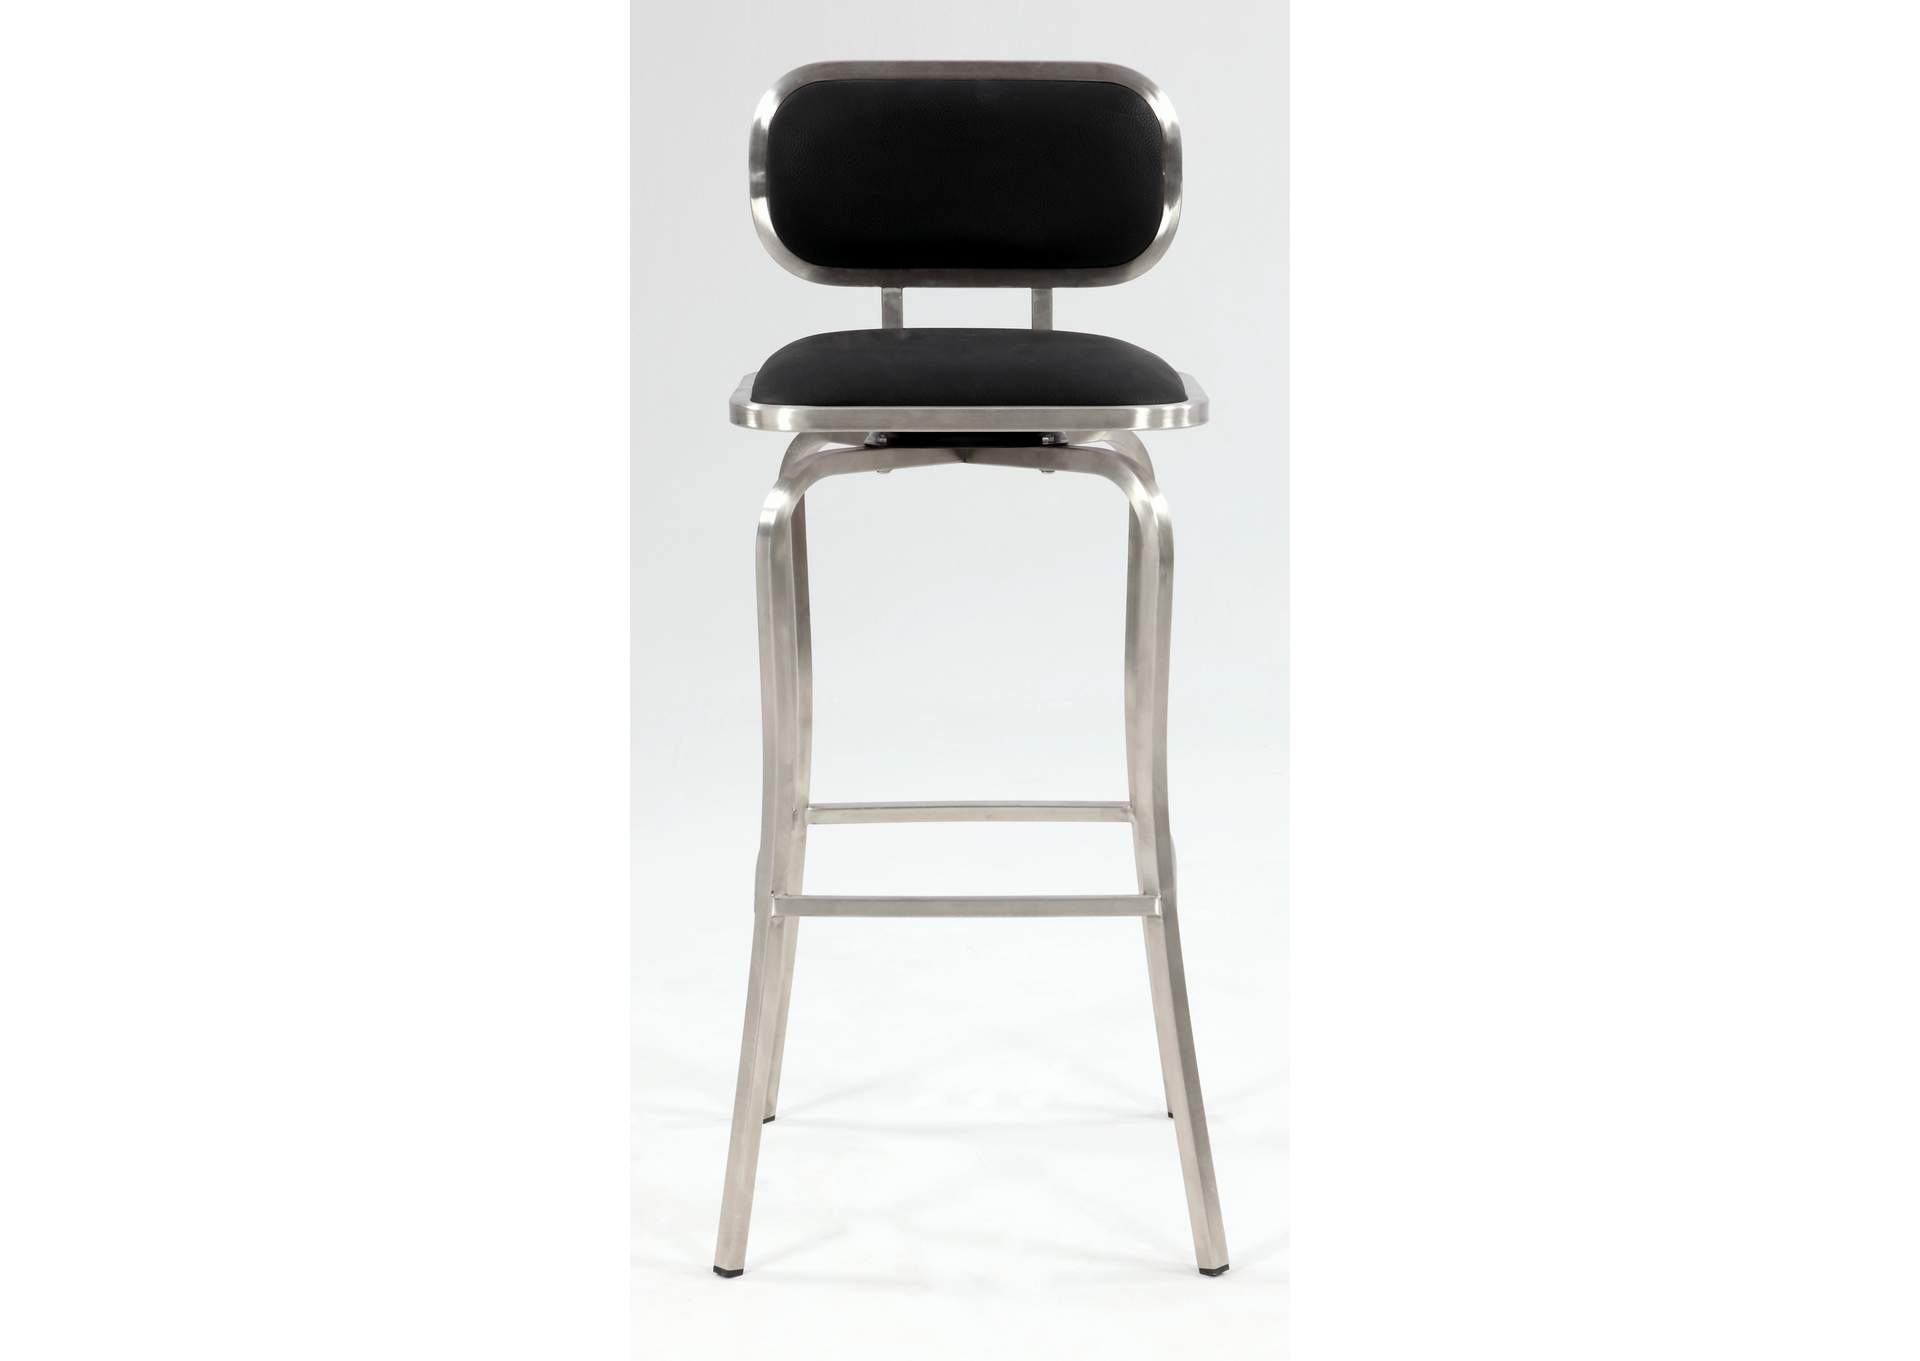 Brushed Stainless Steel Modern Swivel Bar Stool,Chintaly Imports